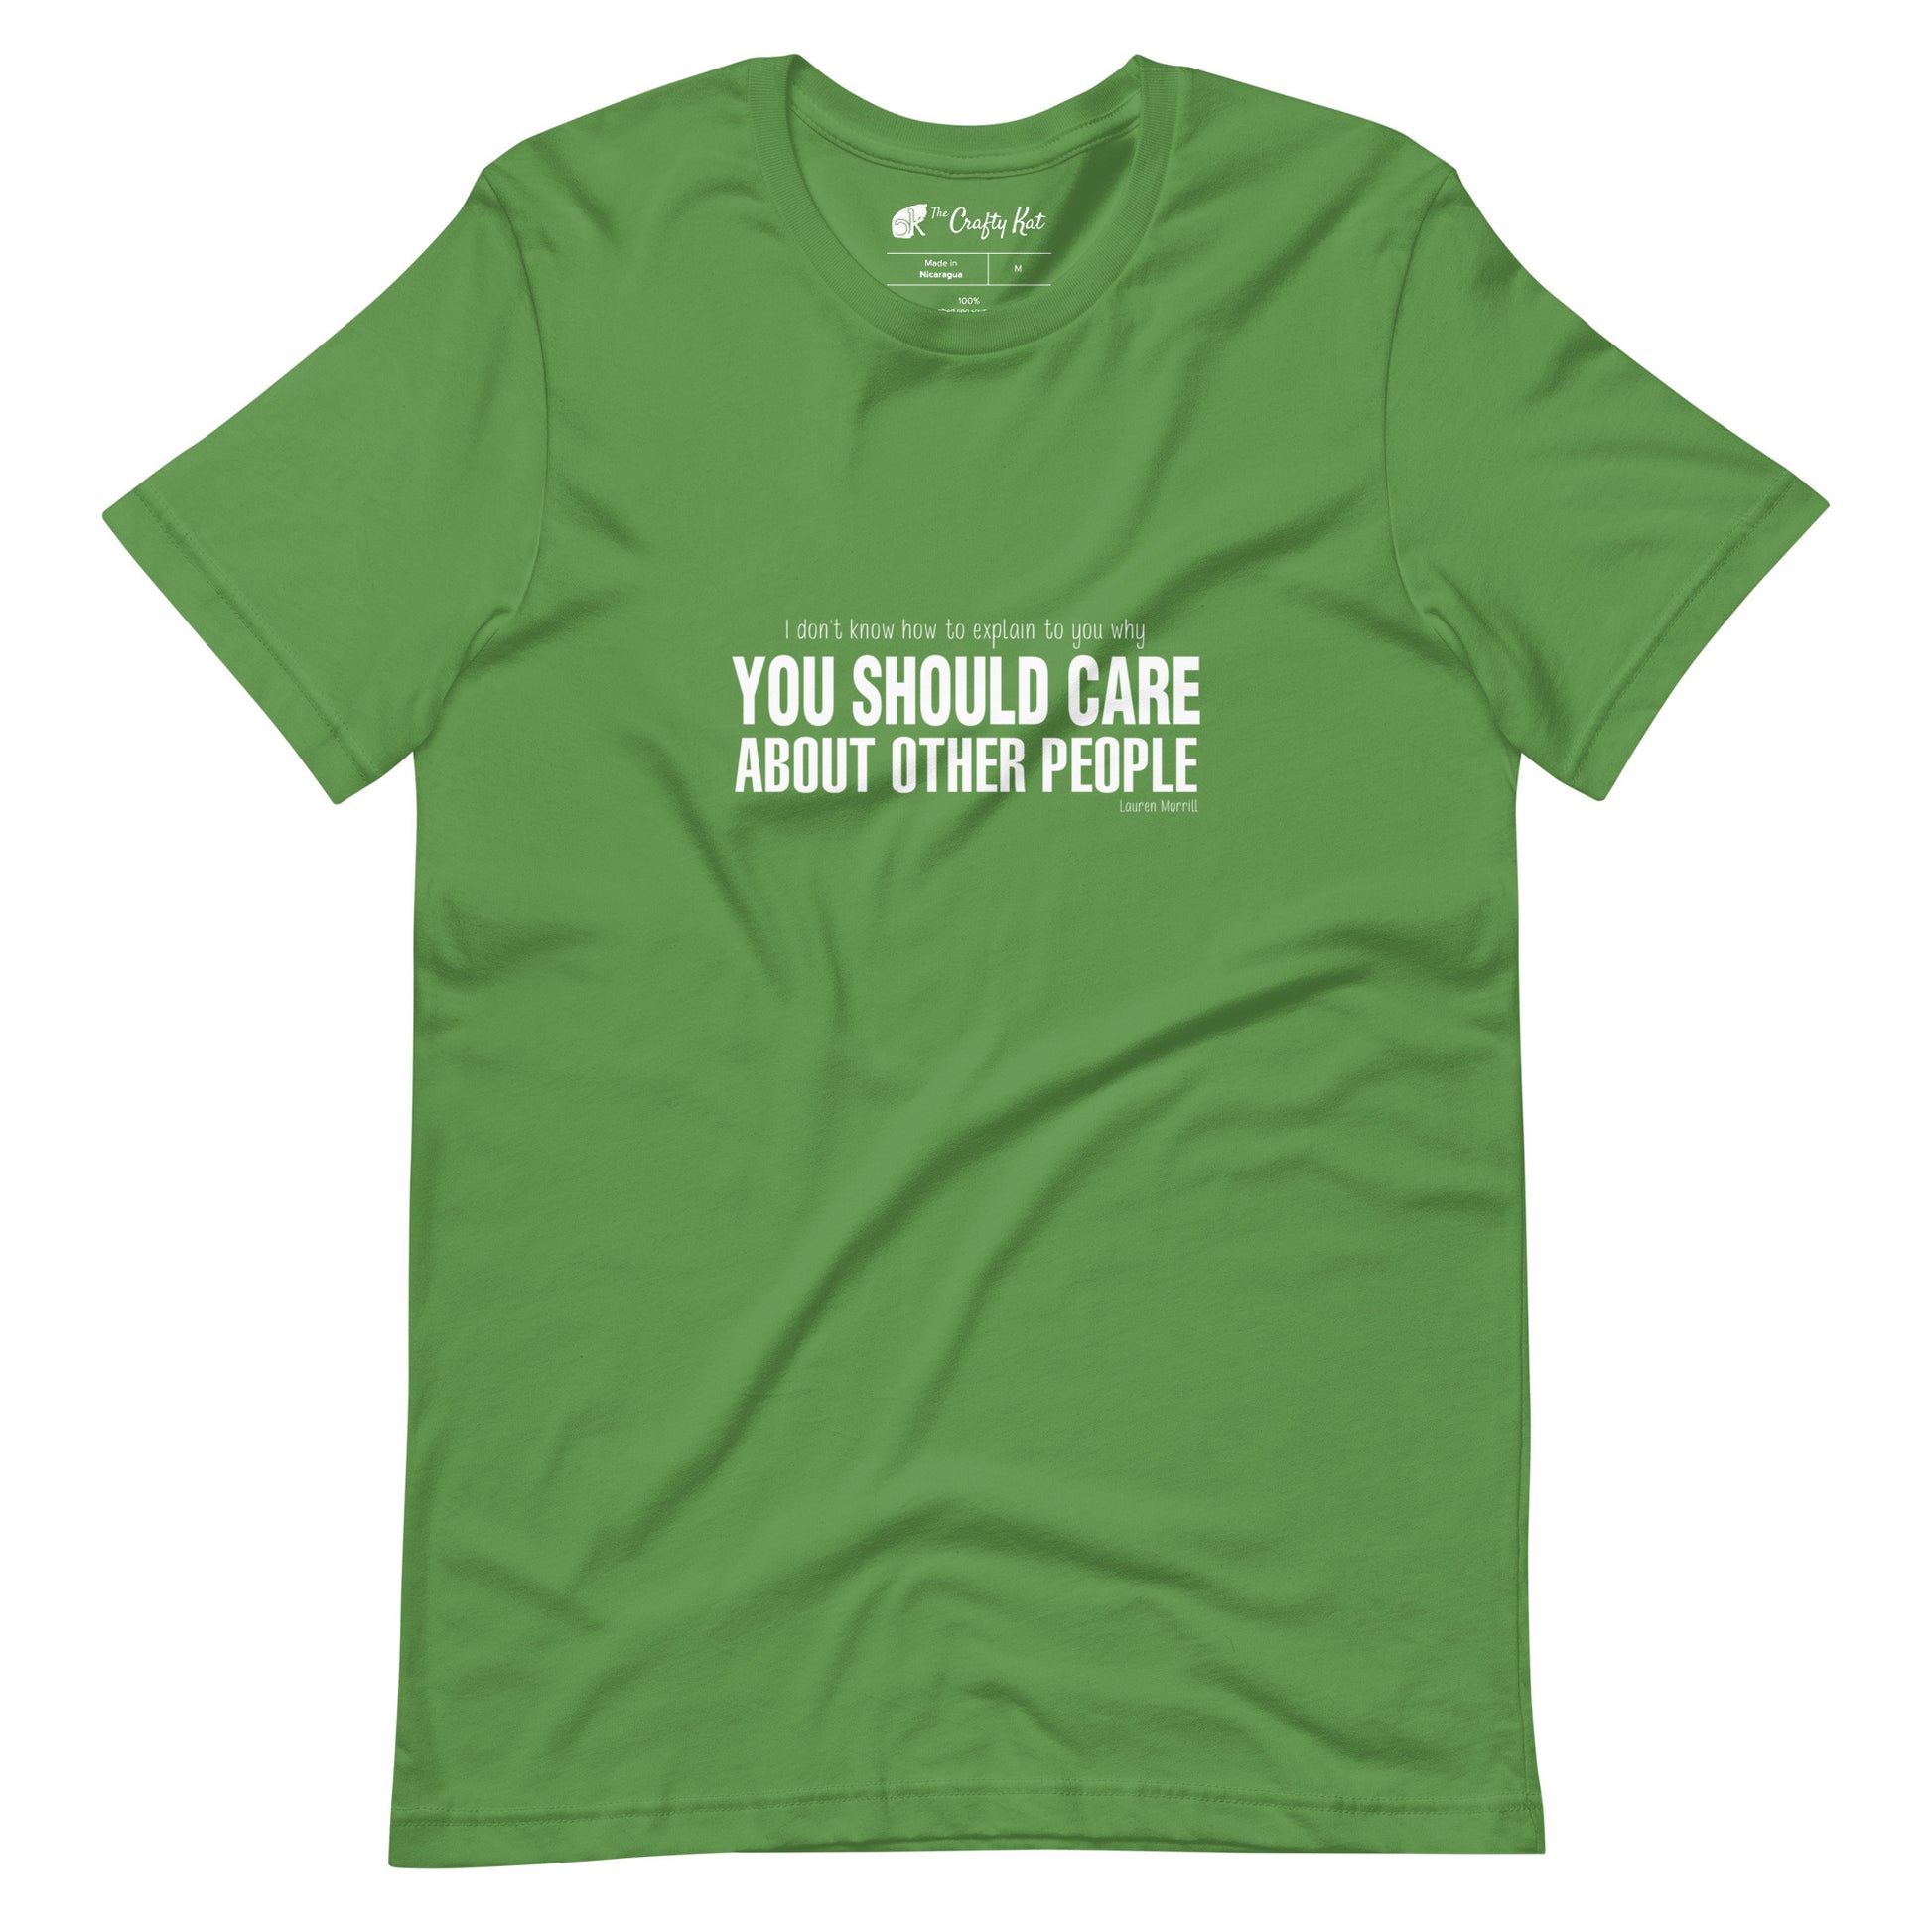 Leaf green t-shirt with quote by Lauren Morrill: "I don't know how to explain to you why YOU SHOULD CARE ABOUT OTHER PEOPLE"